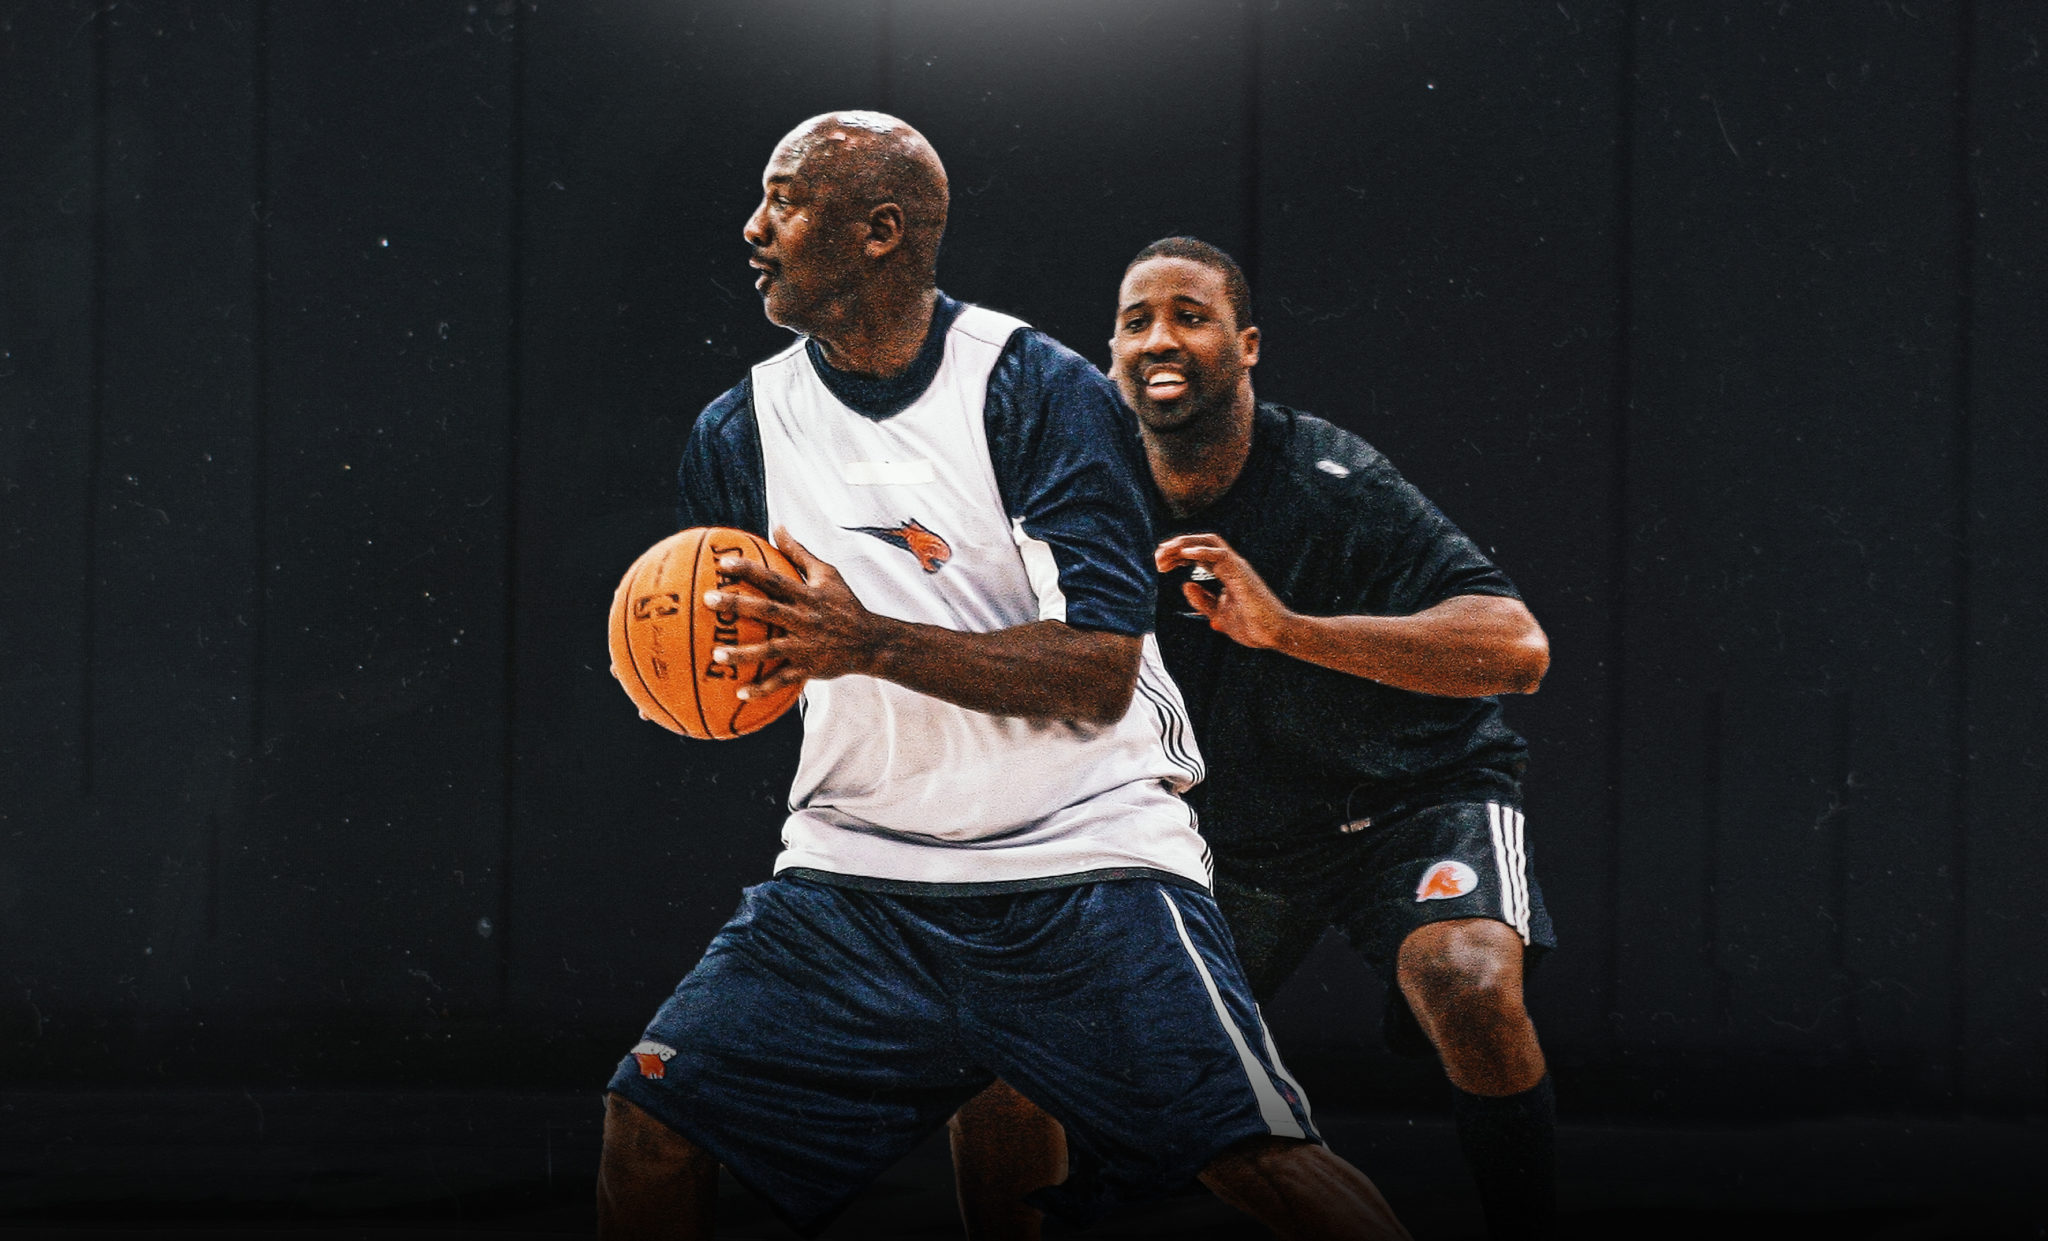 Michael Jordan, Charlotte Bobcats owner, practices with team and